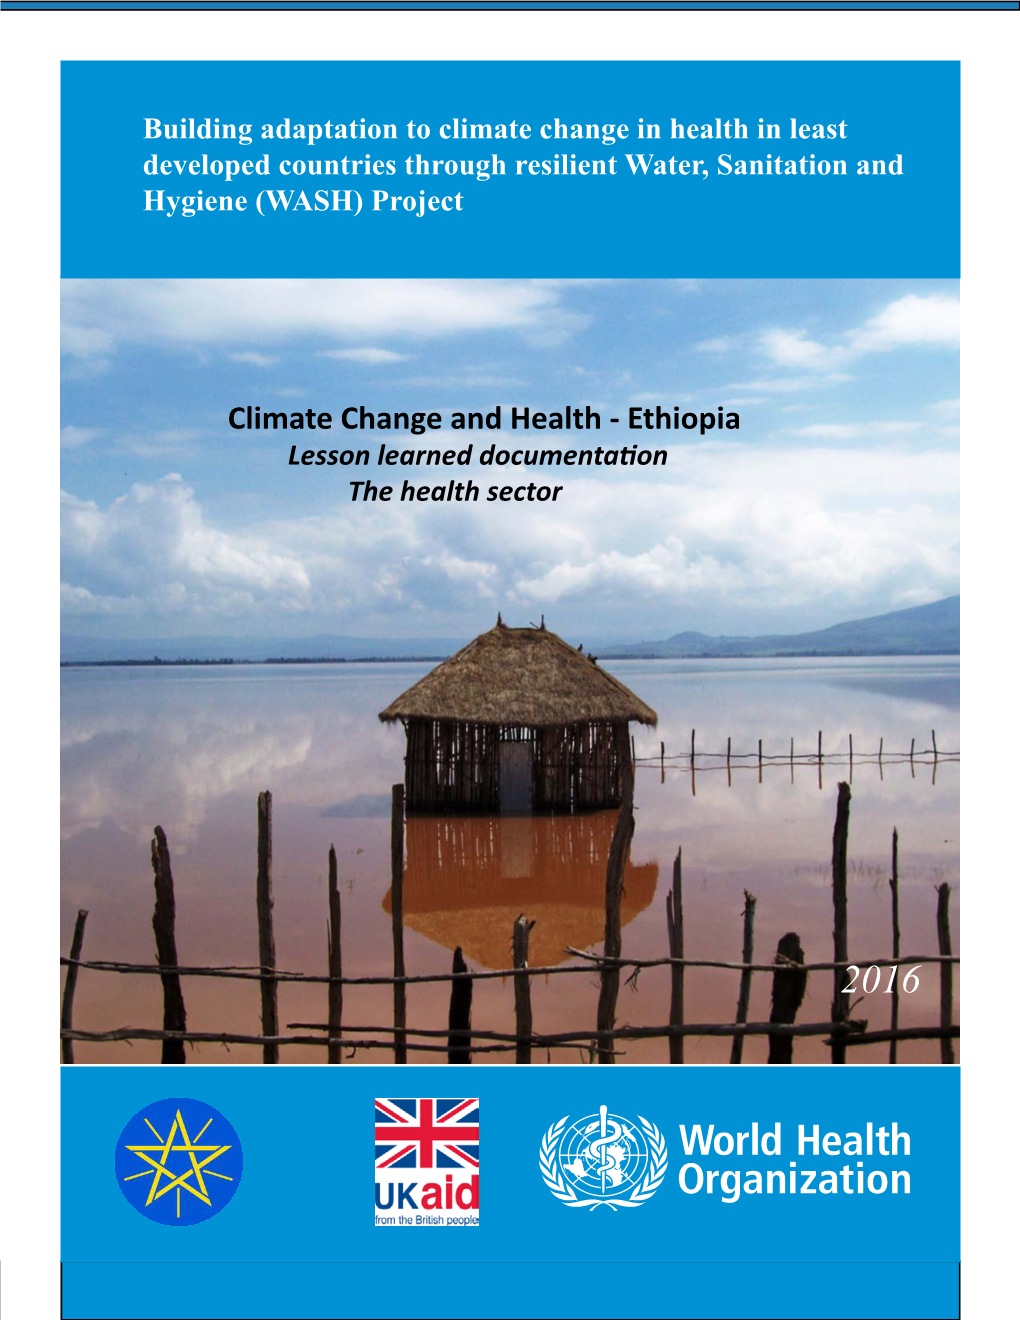 Climate Change and Health - Ethiopia Lesson Learned Documentation the Health Sector